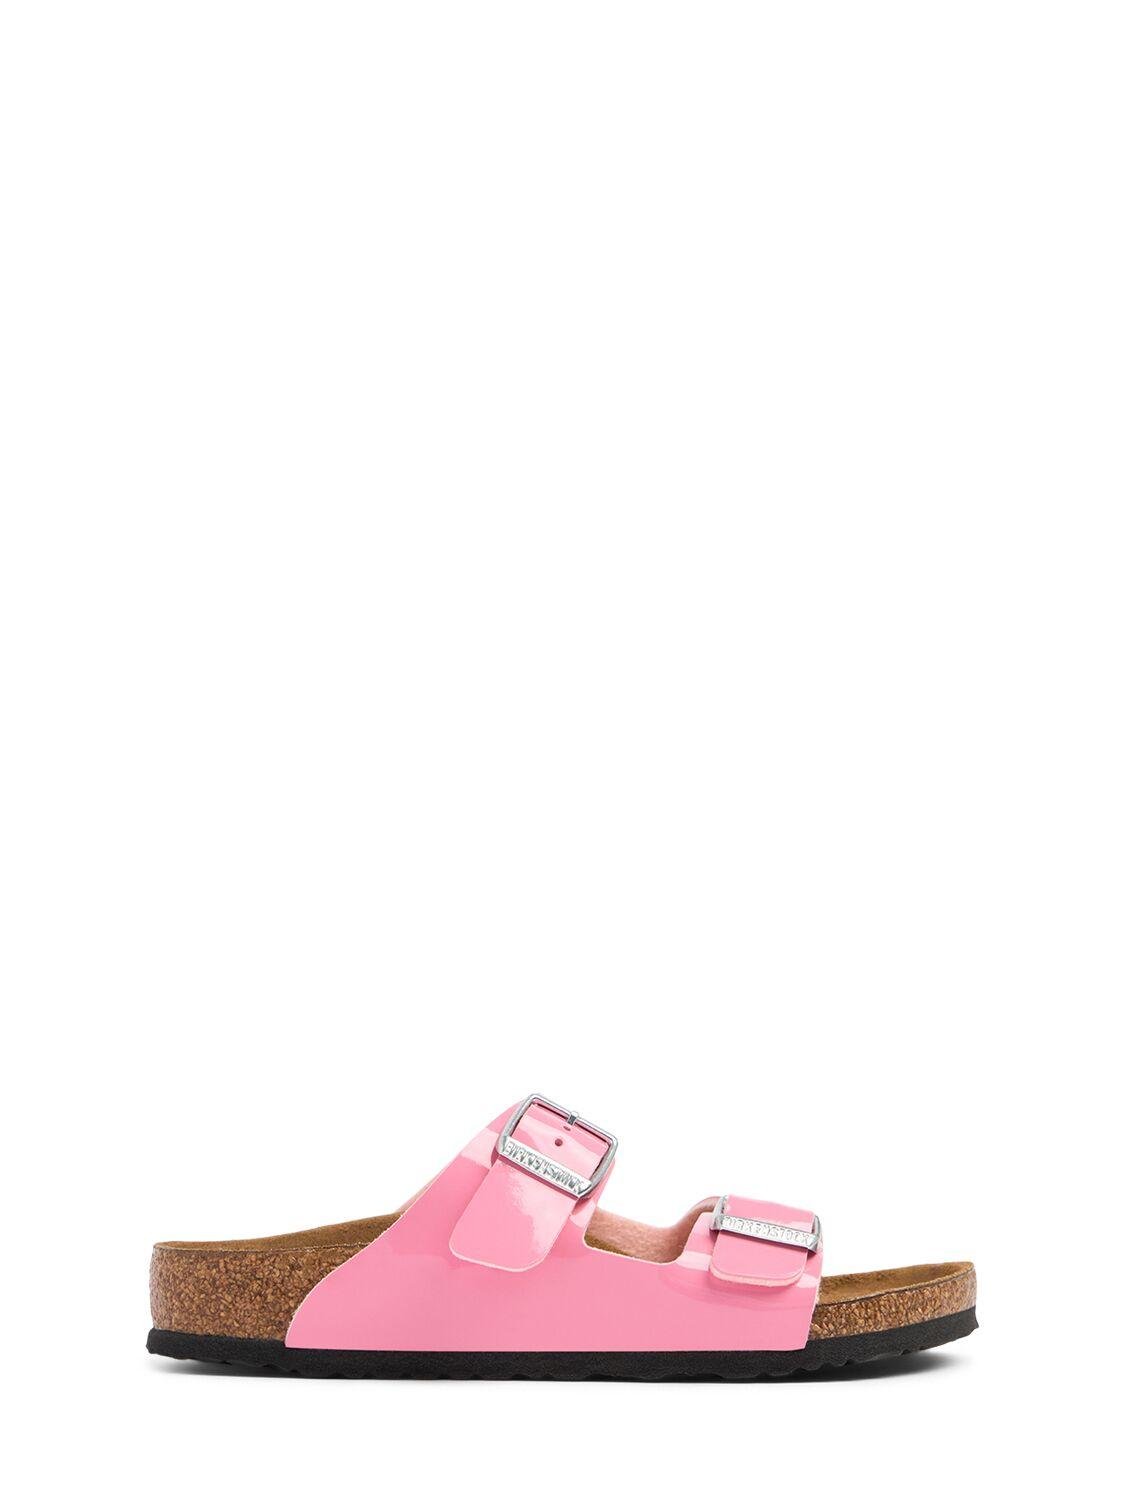 Patent Arizona Faux Leather Sandals by BIRKENSTOCK